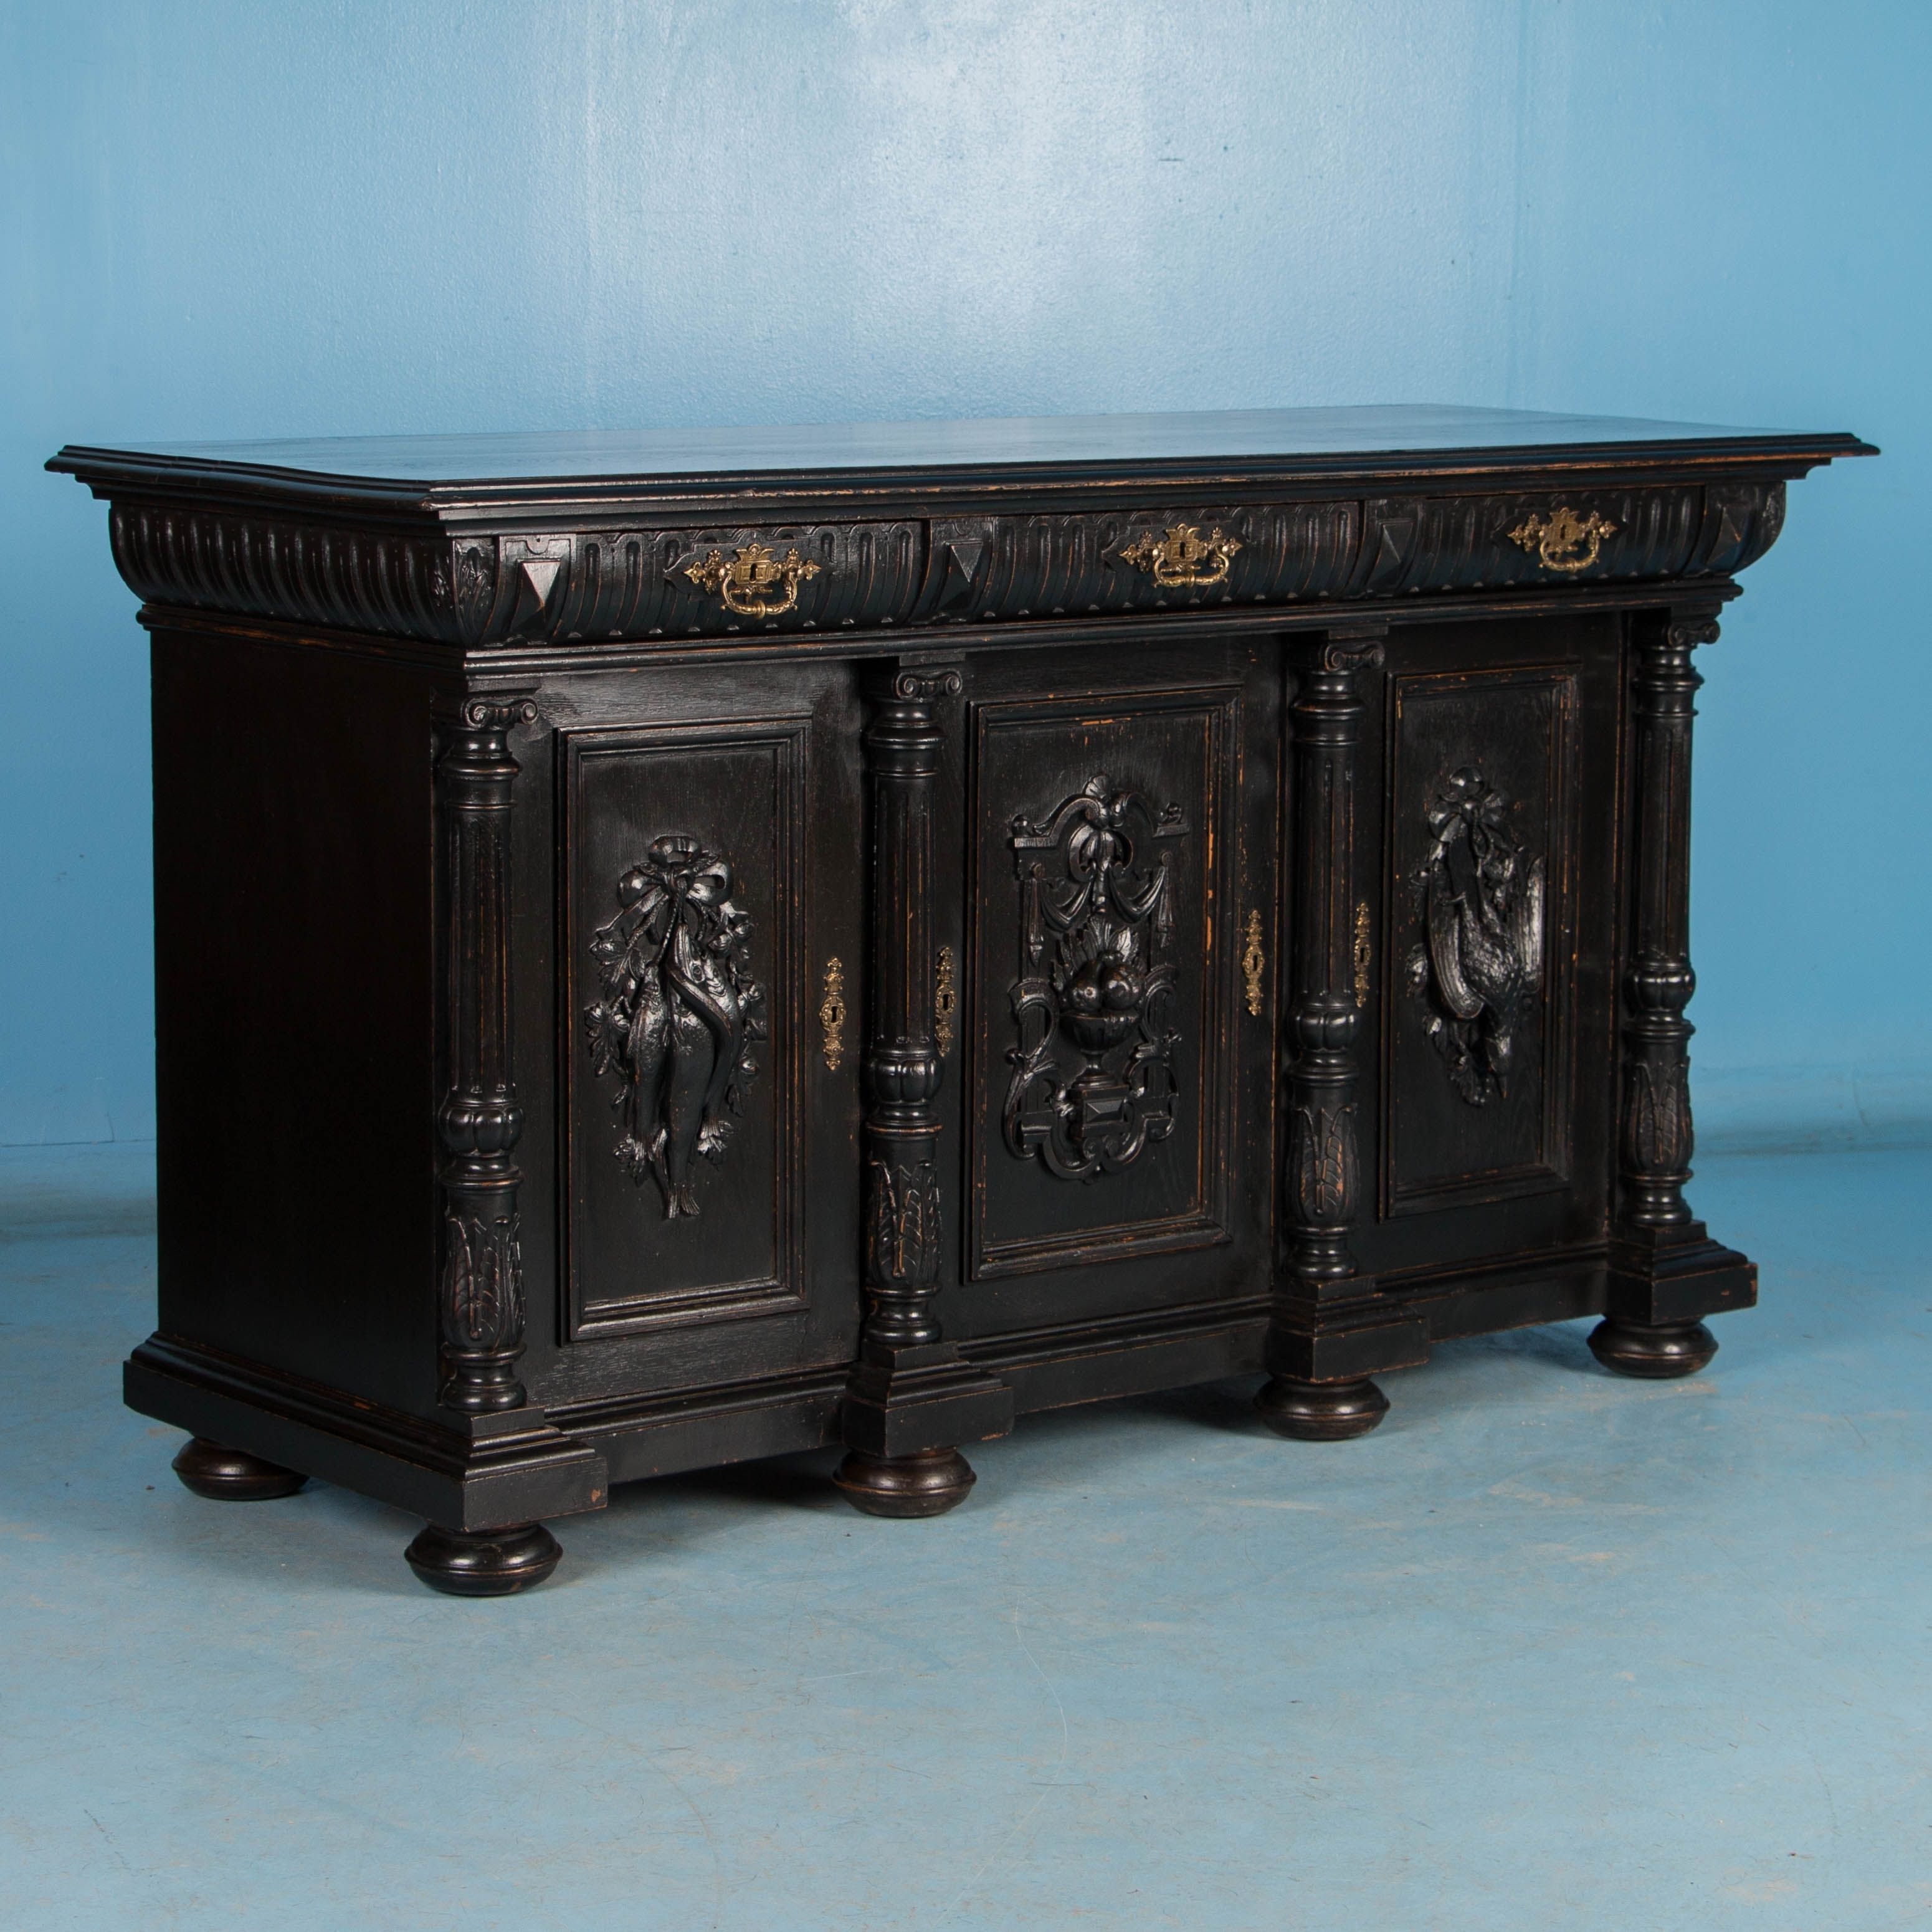 Carved Antique Danish Sideboard With Black Paint | Ebay Intended For Carved 4 Door Metal Frame Sideboards (View 30 of 30)